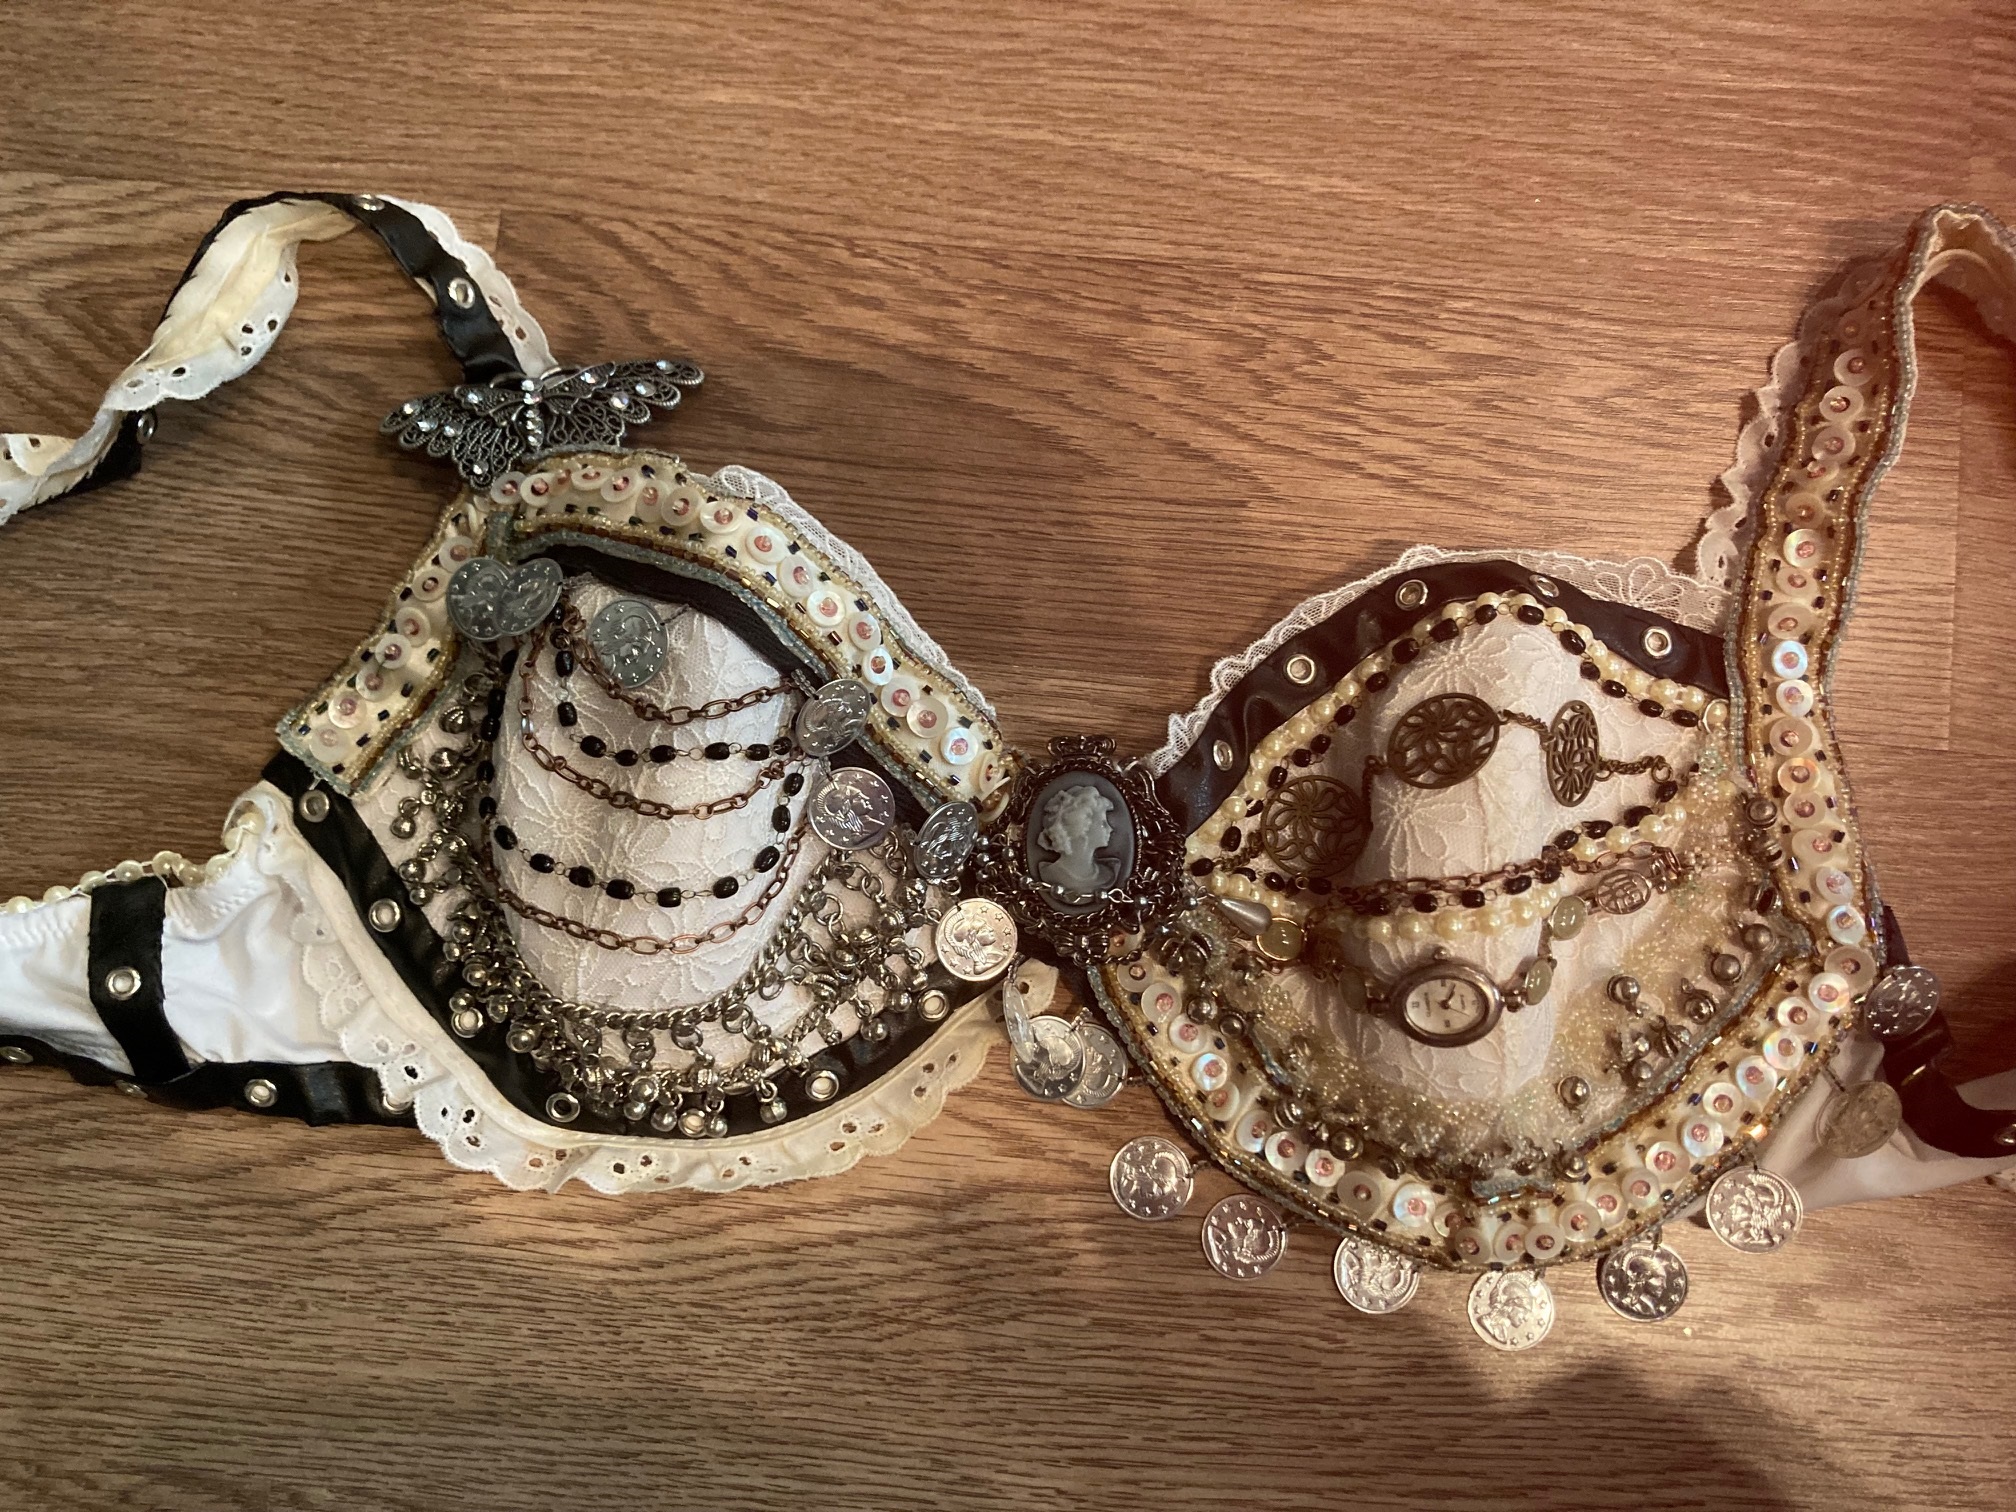 DIY Belly Strap (+ no bump option!) for Belly Dance Costumes